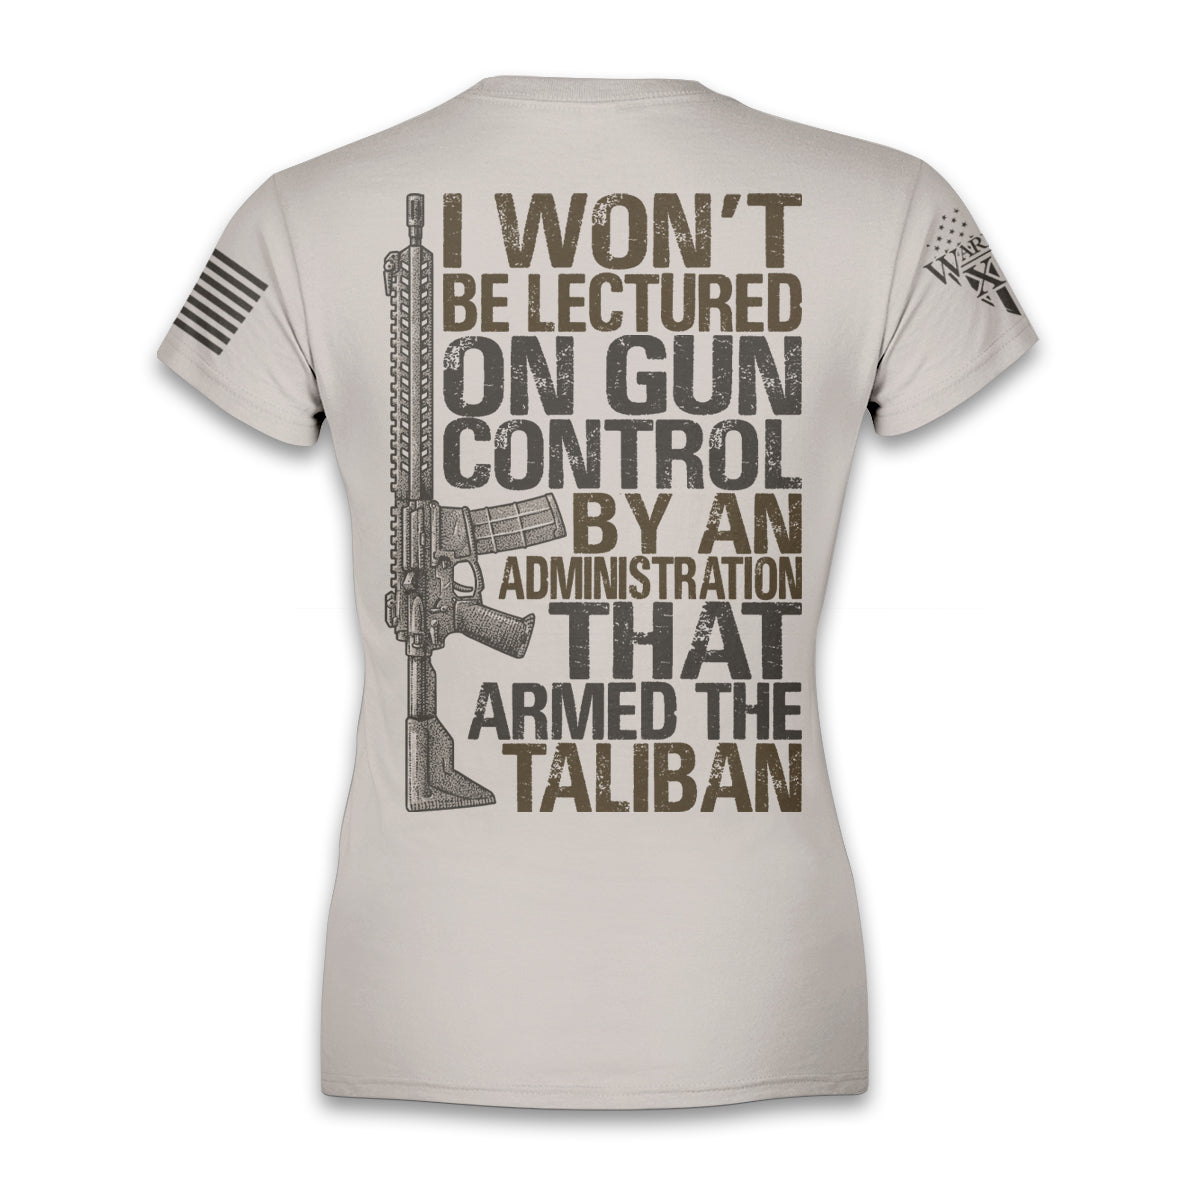 A light tan women's relaxed fit shirt with the words 'I won't be lectured on gun control by an administration that armed the Taliban" with an AR15 printed on the back of the shirt.